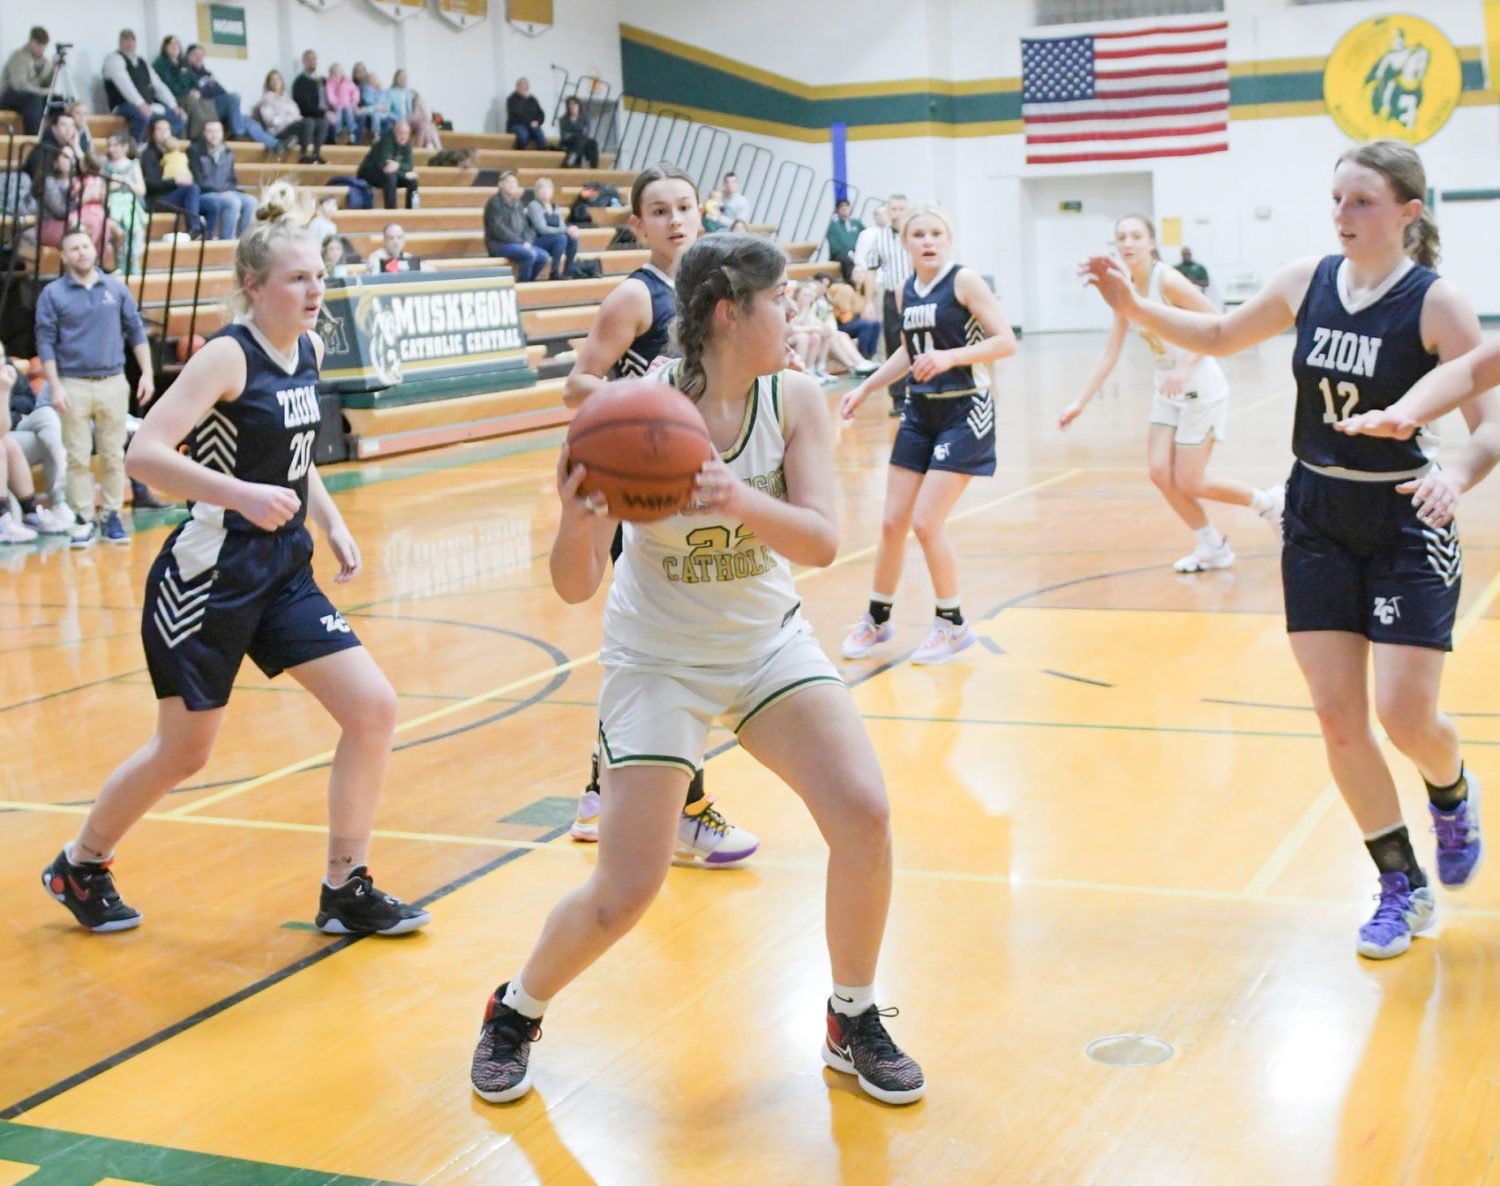 Muskegon Catholic comes up short against Zion Christian in girls hoops